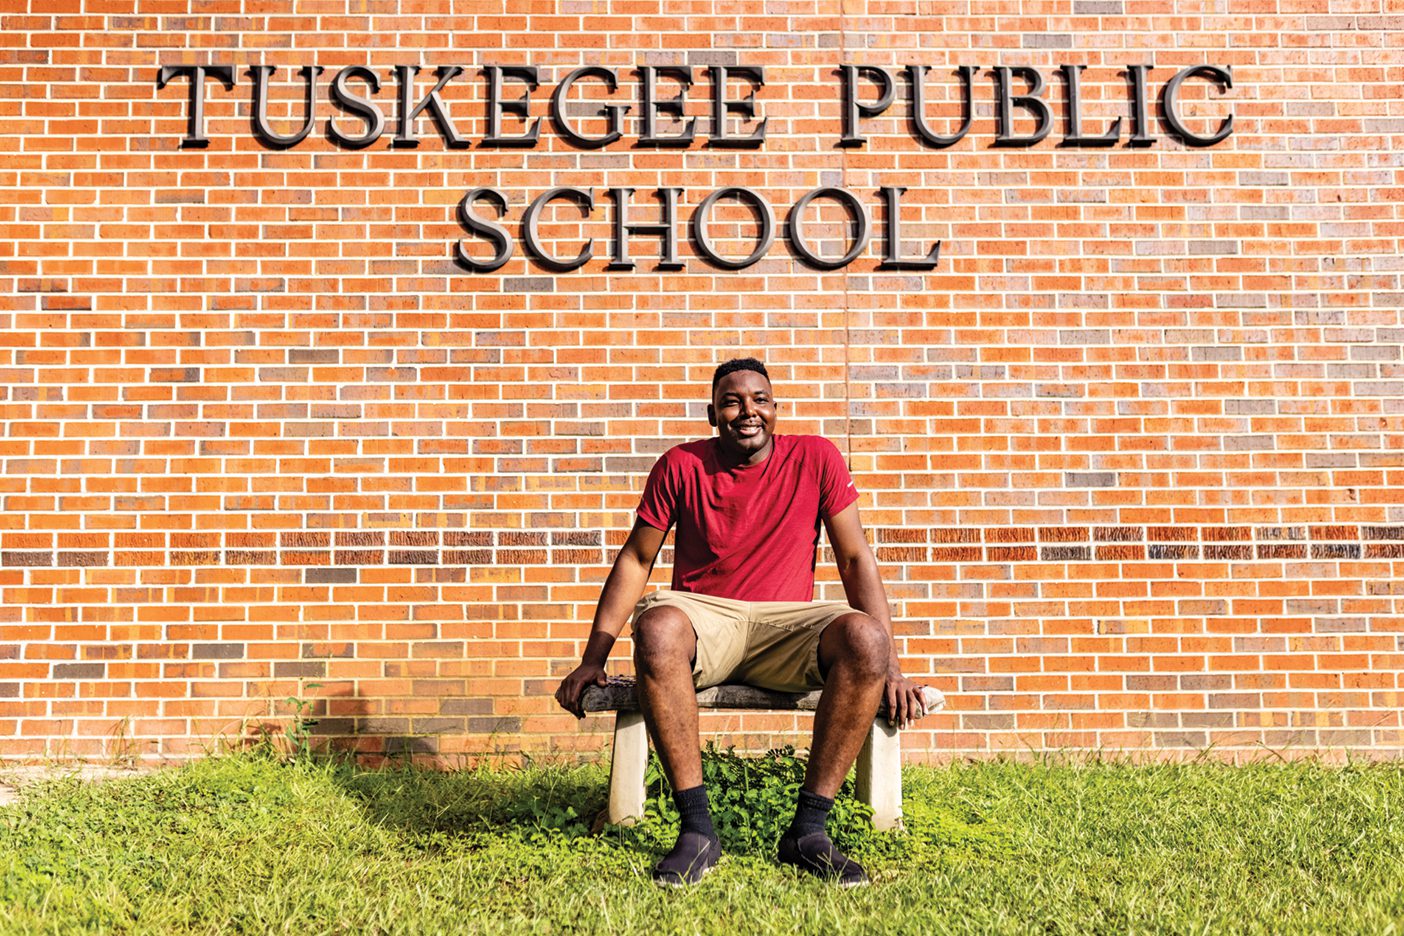 A Black man sits outside a red-brick school with engraved letters that say "Tuskegee Public School."